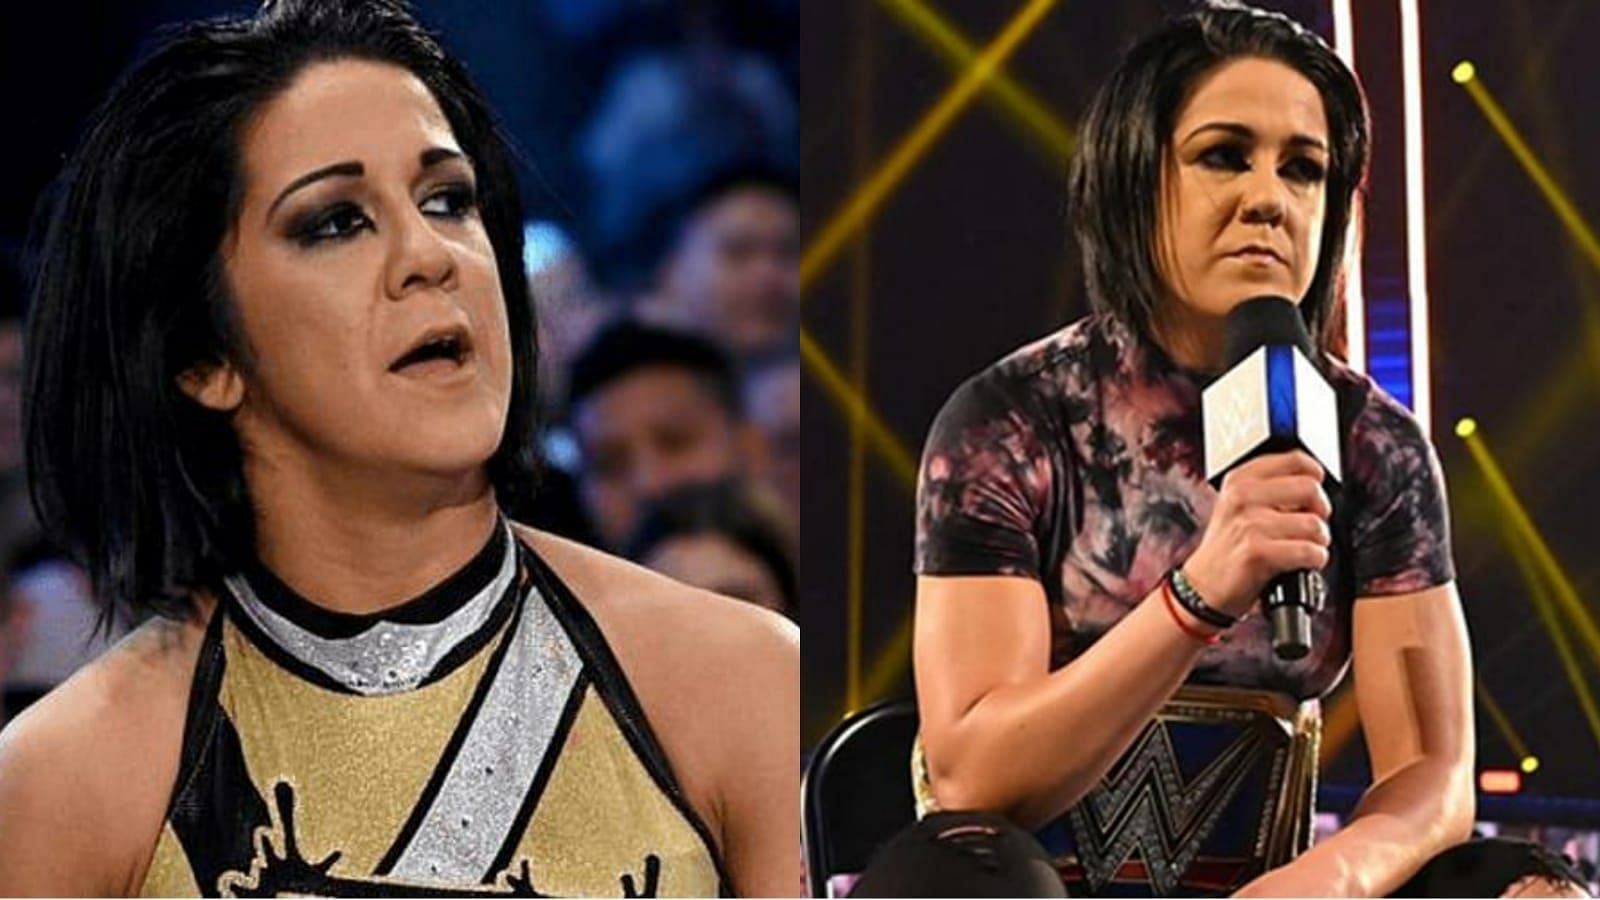 Bayley made an emotional appeal to fans!